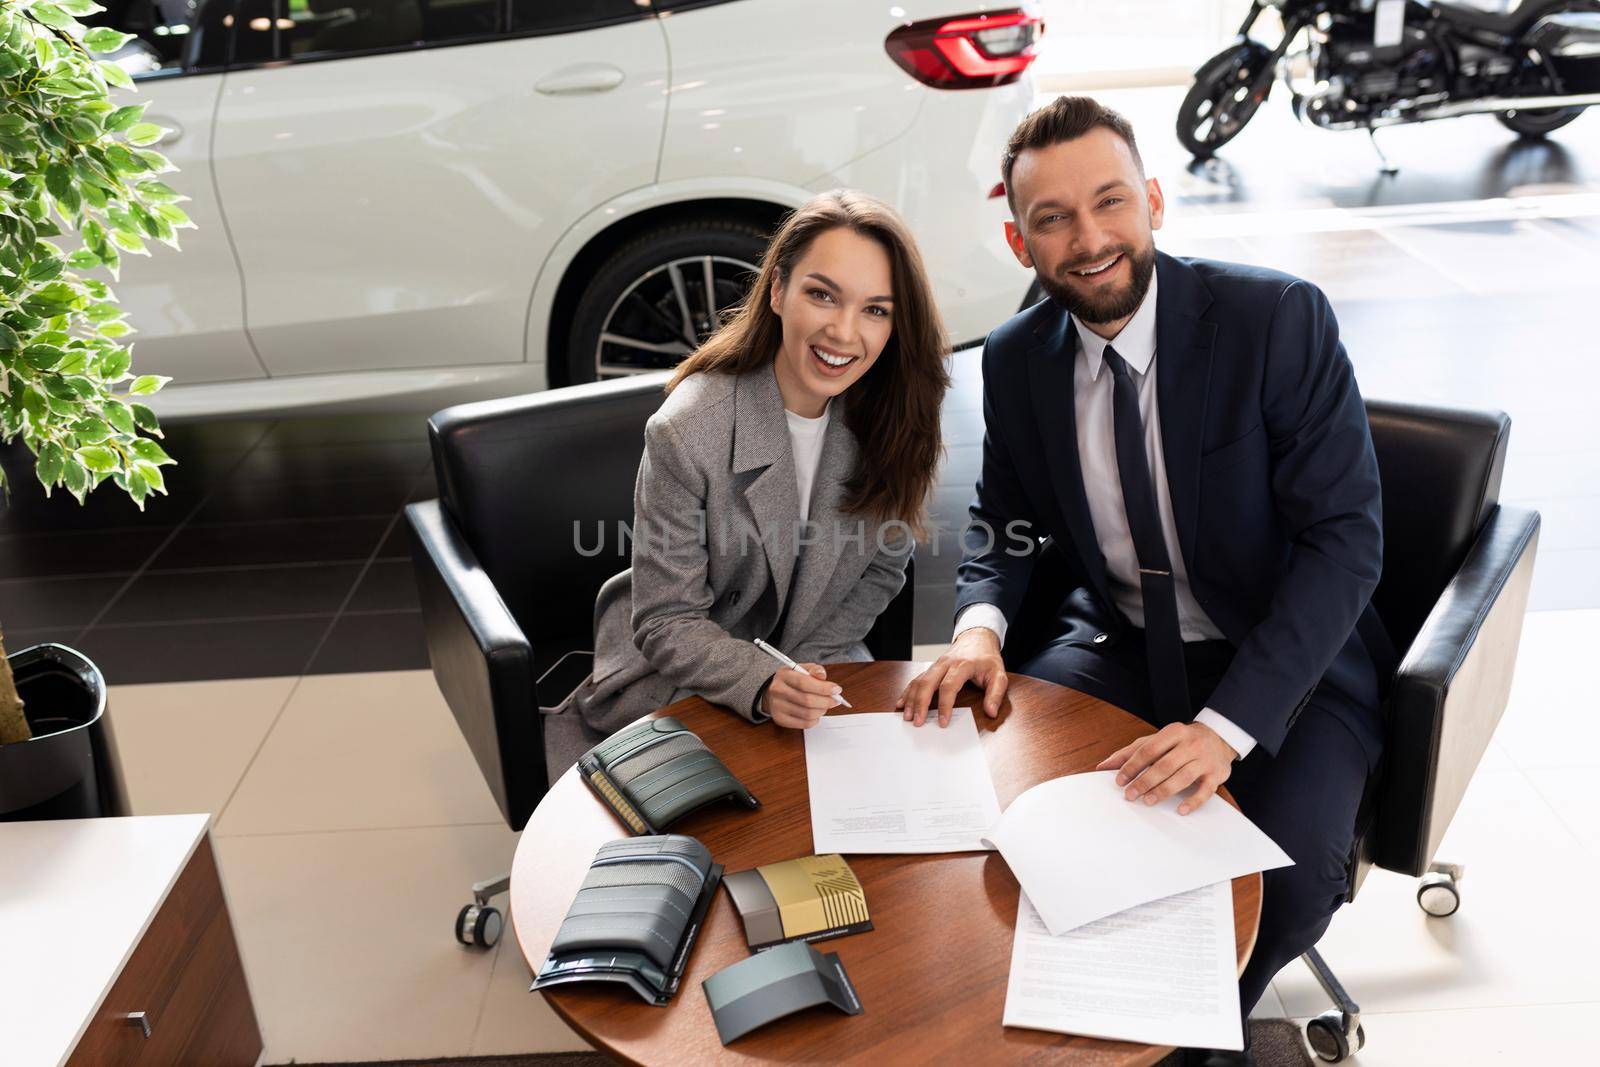 car dealership manager and satisfied buyer on the background of new cars in the dealership.